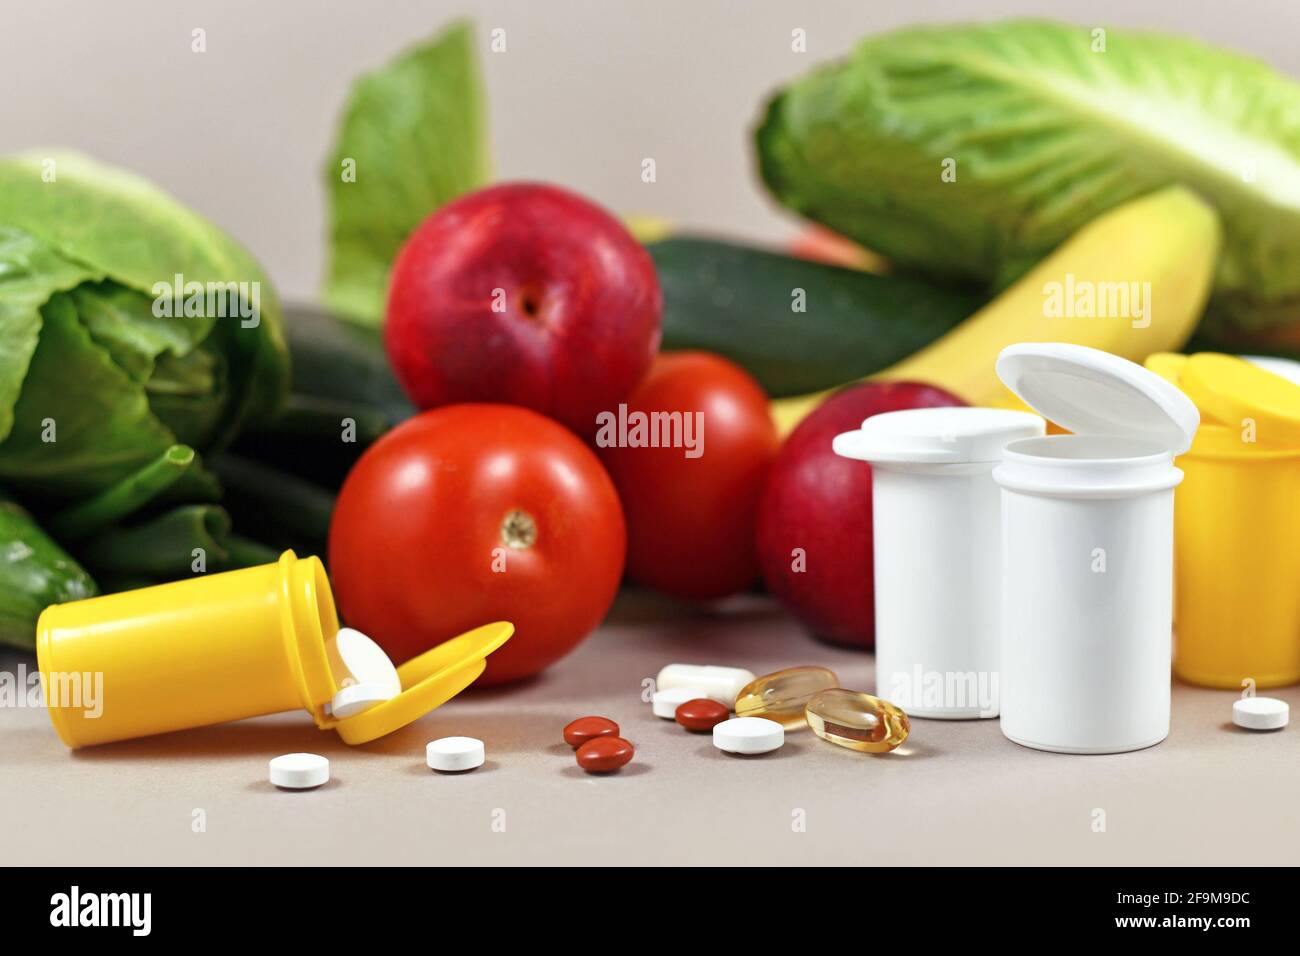 Bottles with pills of food nutrition supplements in front of fruits and vegetables in background Stock Photo